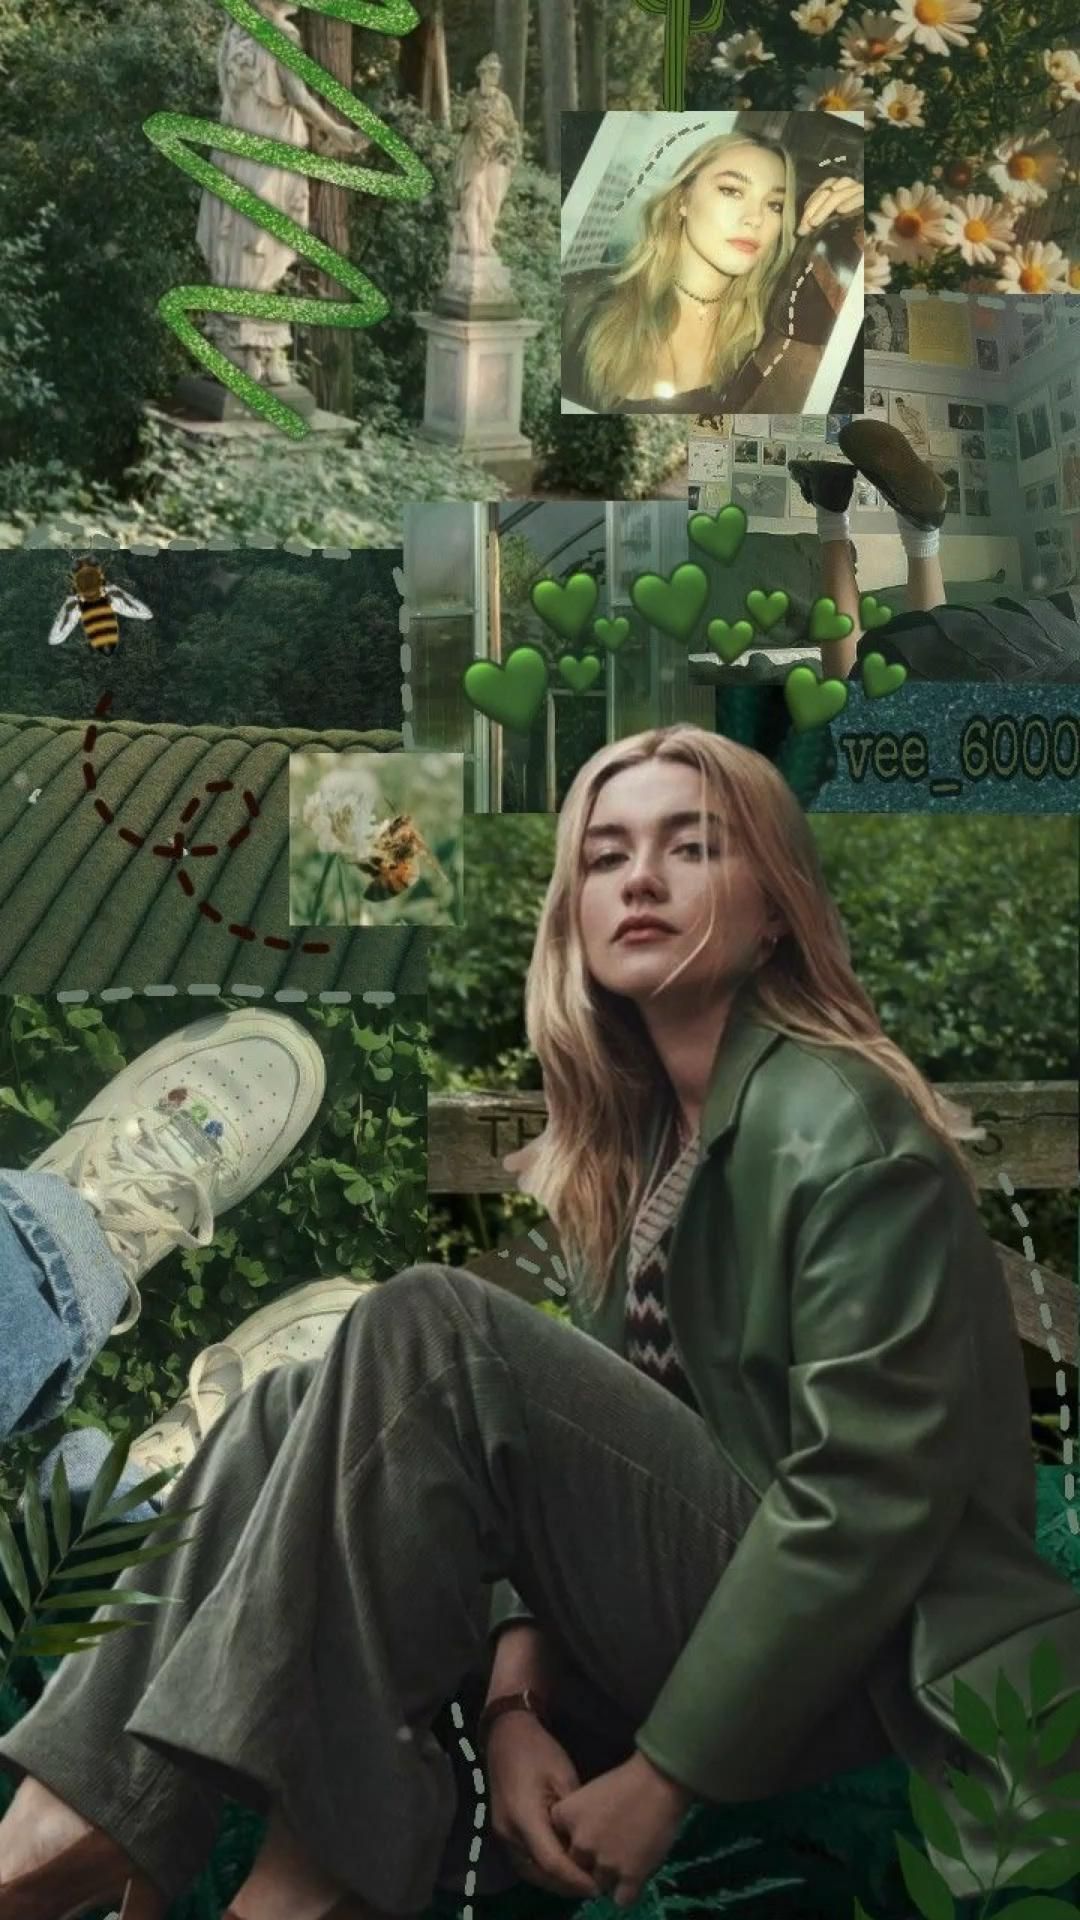 IPhone wallpaper of florence pugh in the movie “happiest season” - Florence Pugh